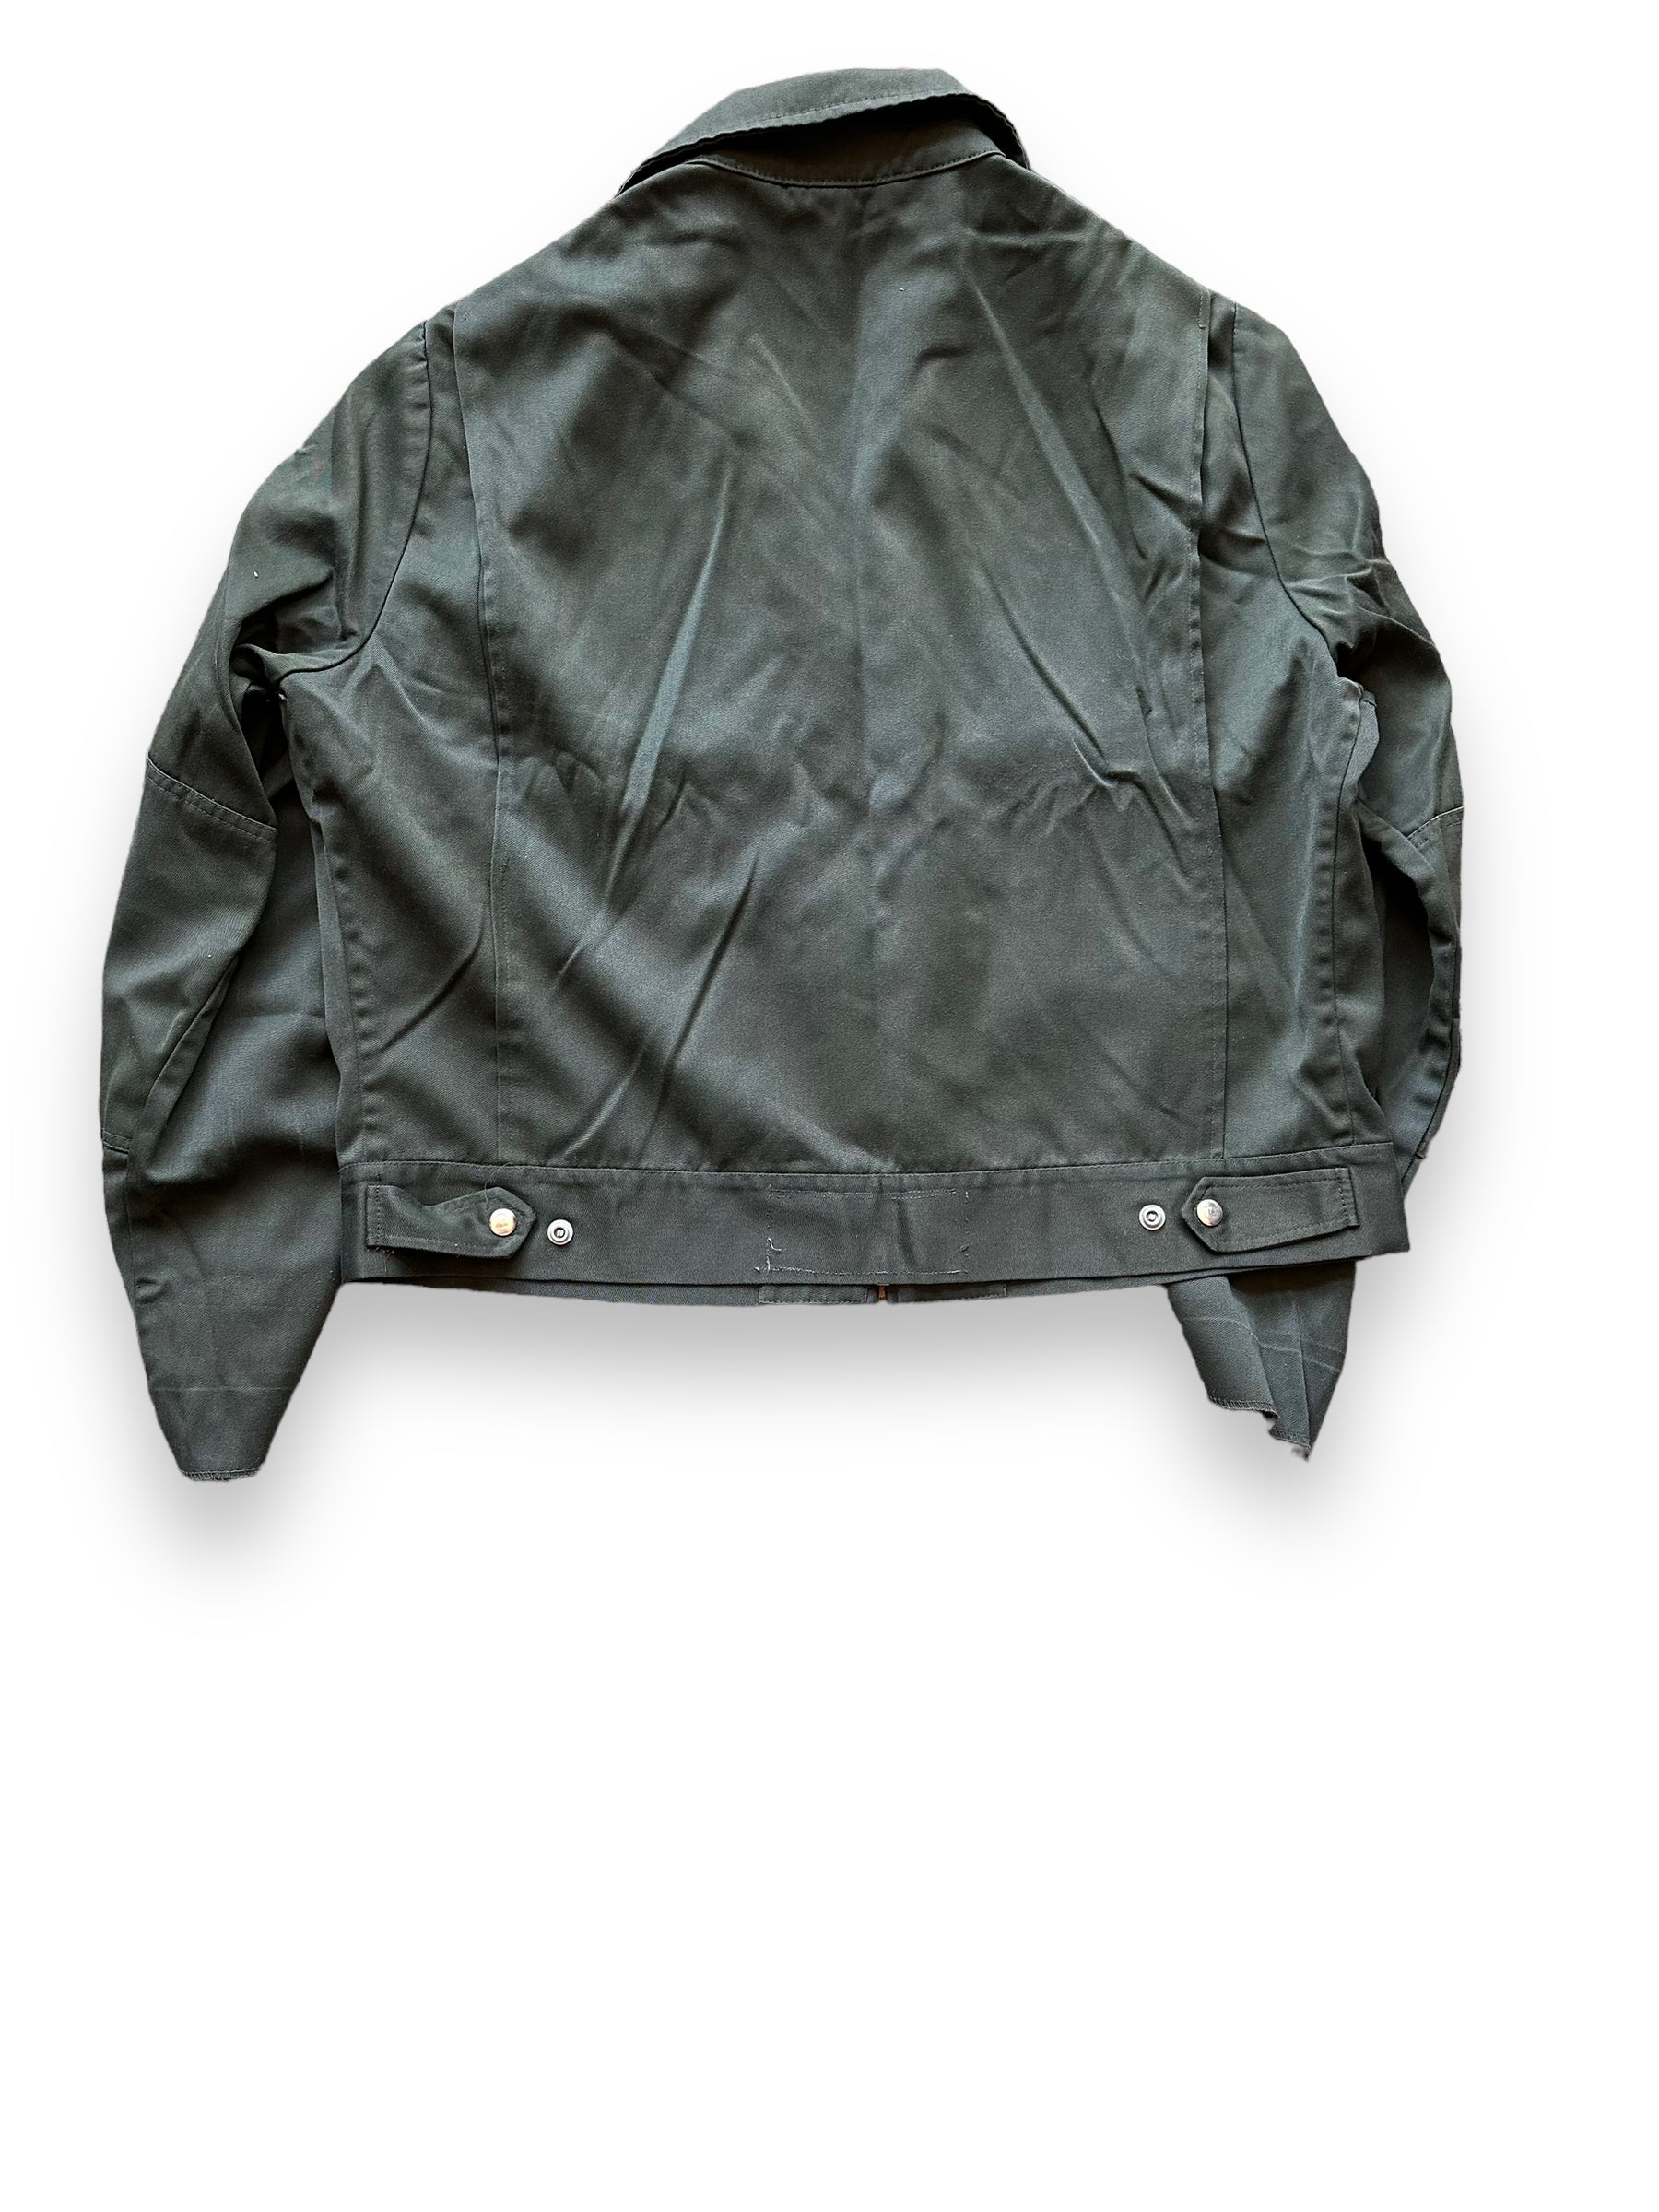 Rear View of Vintage Day's Gas Station Jacket SZ 48 | Vintage Workwear Jacket Seattle | Seattle Vintage Clothing